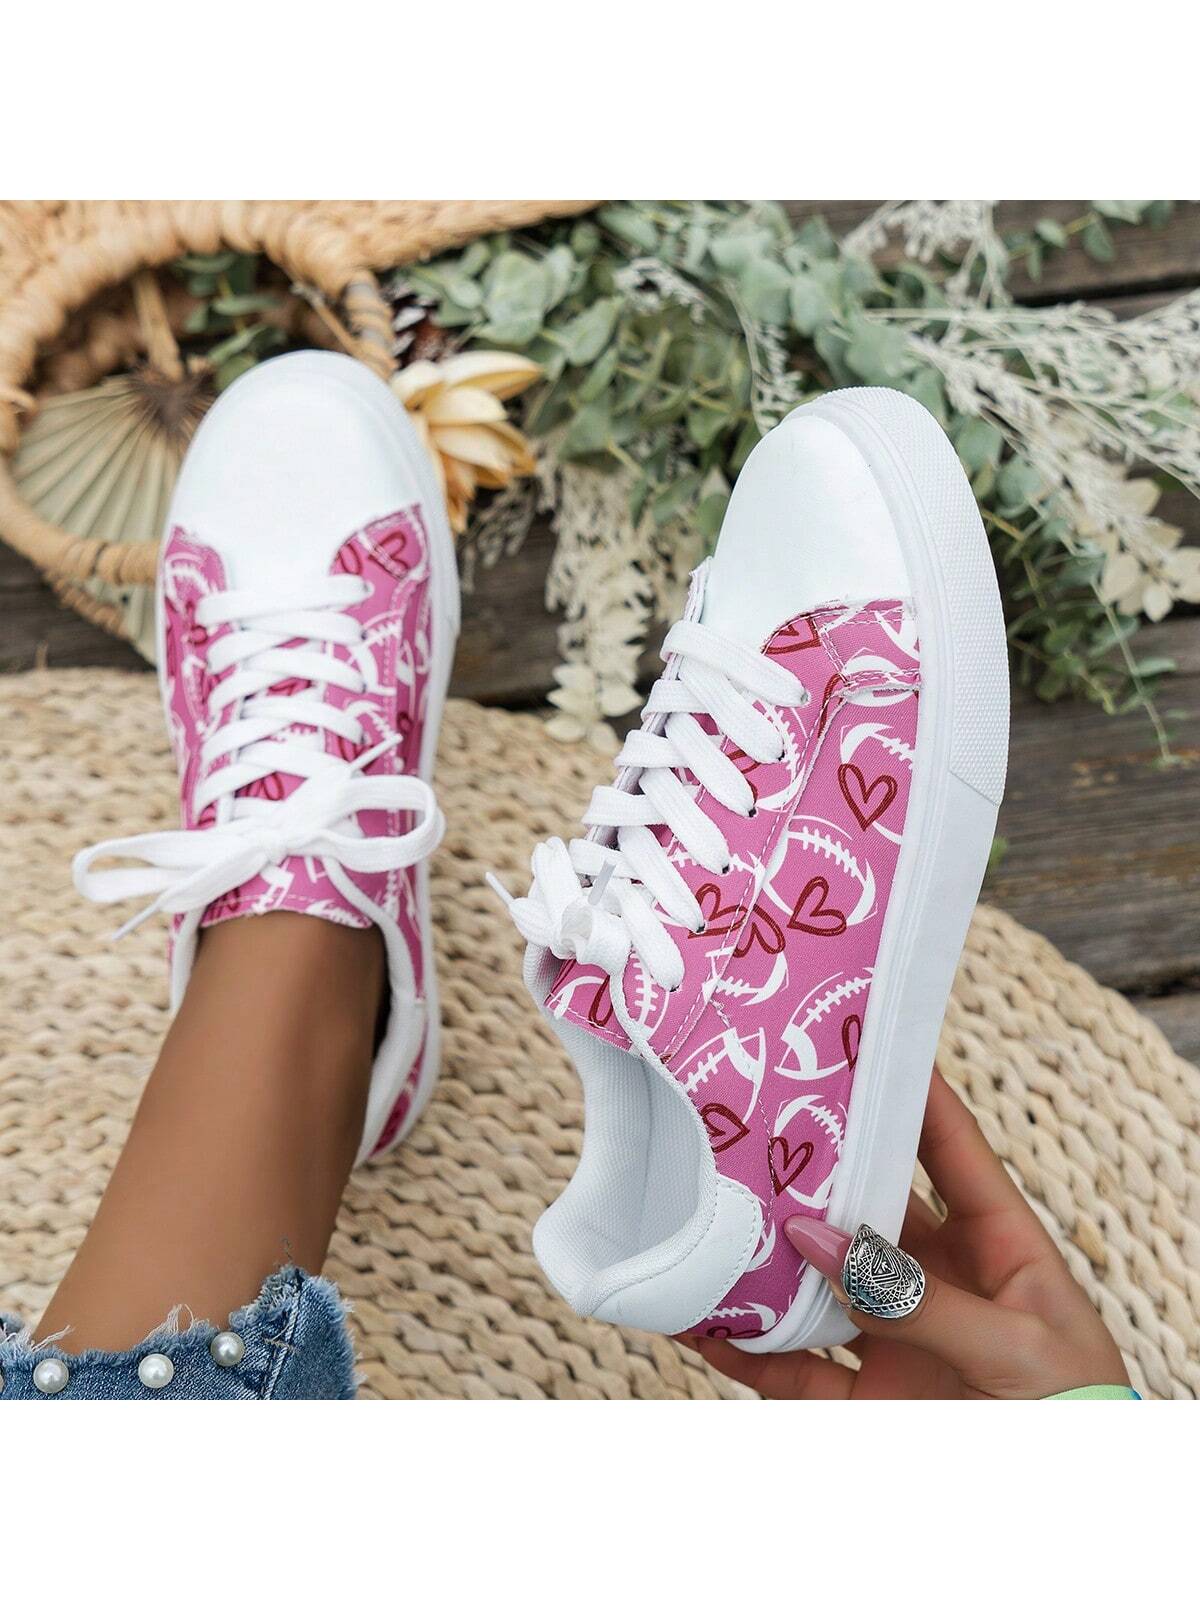 2024 Women Low Cut Fashion Single Shoes Sports Casual Shoes Student Shoes White Shoes-Hot Pink-1